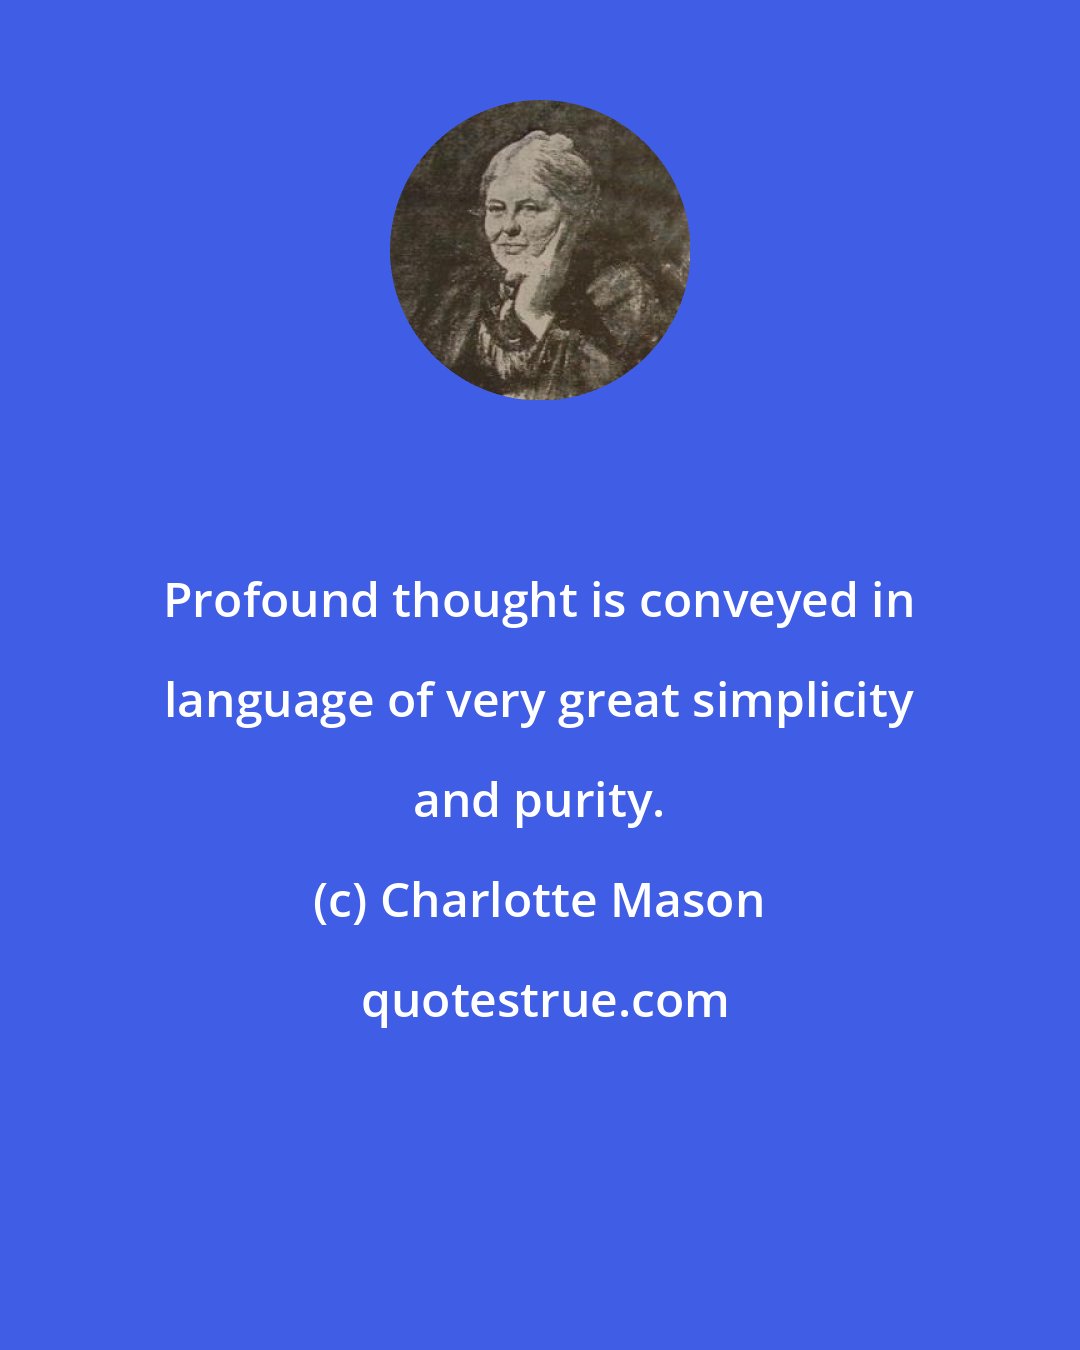 Charlotte Mason: Profound thought is conveyed in language of very great simplicity and purity.